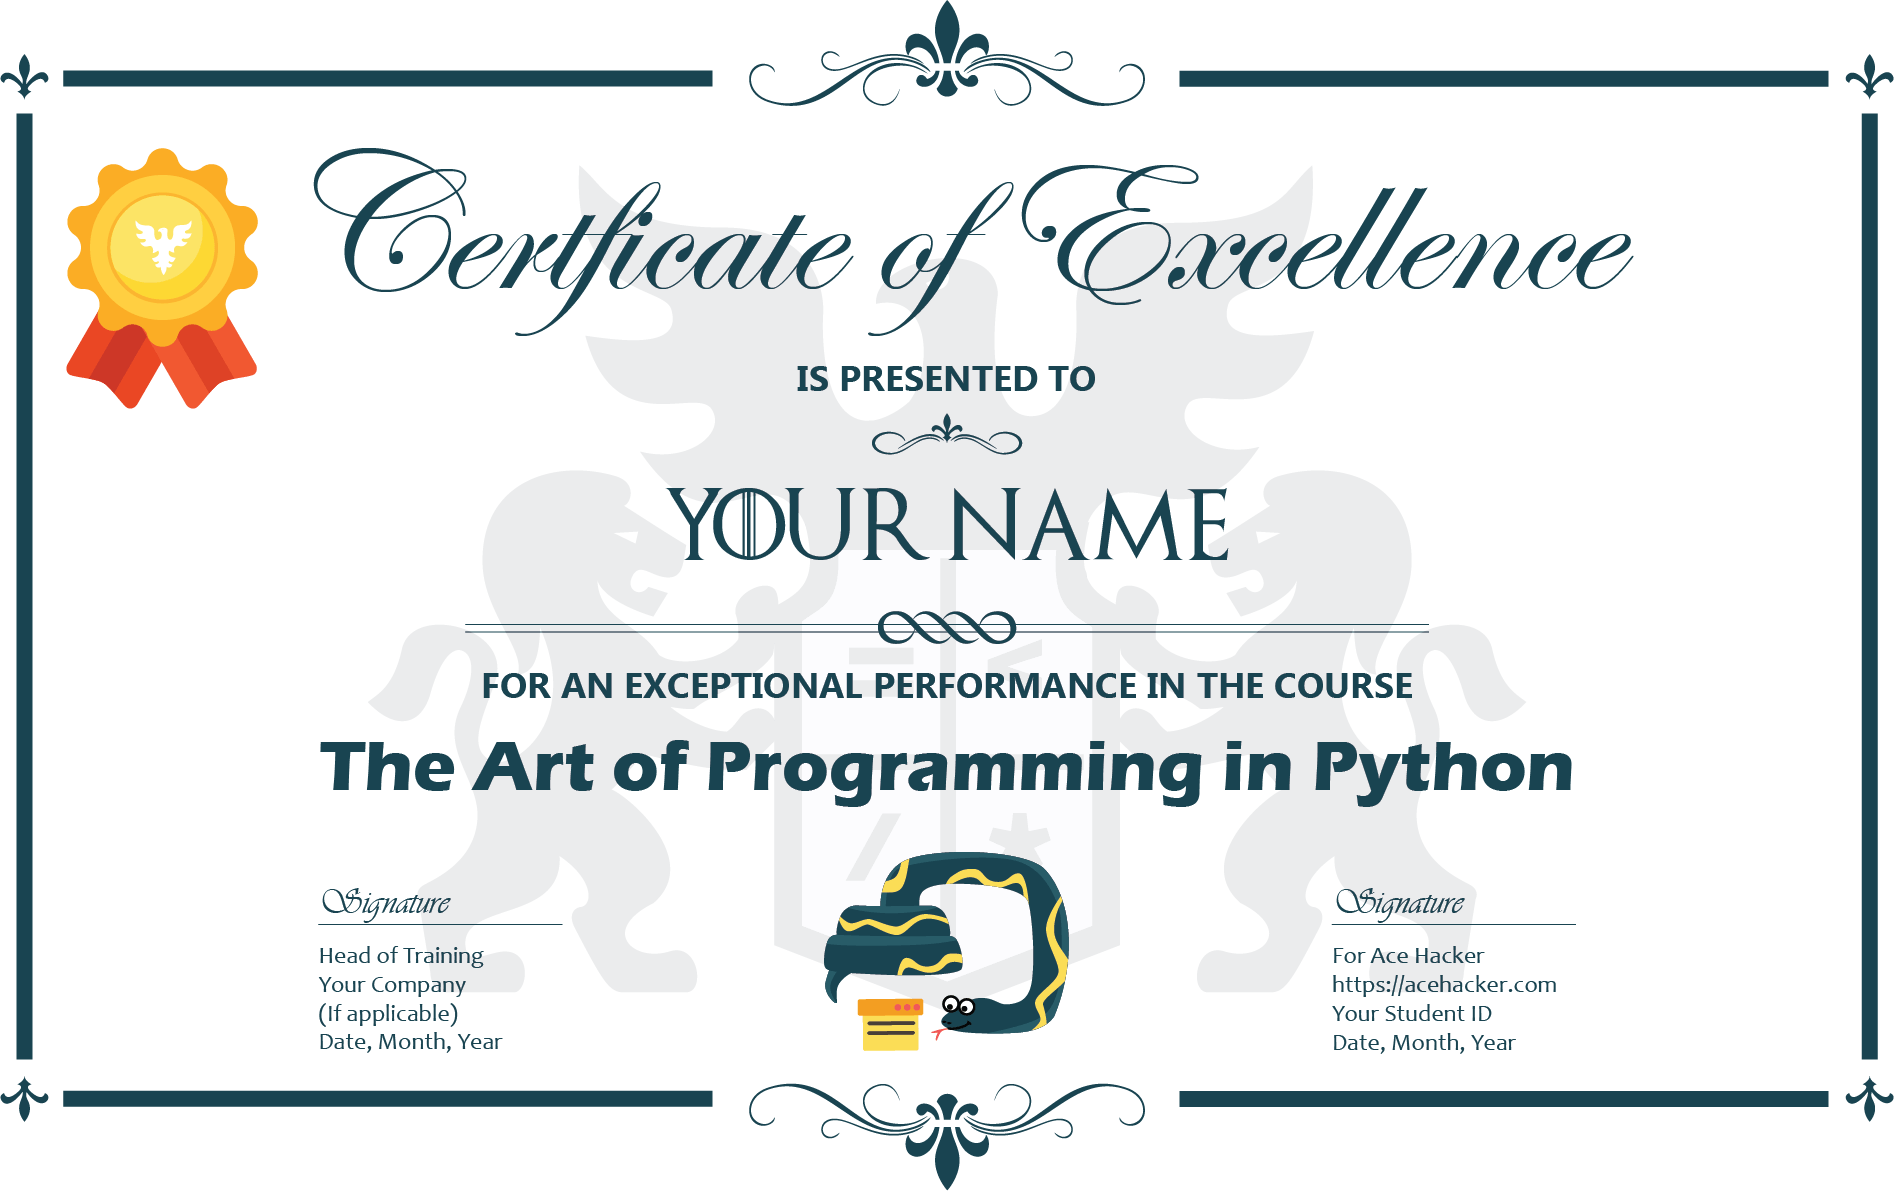 Certificate of Excellence in Python Programming